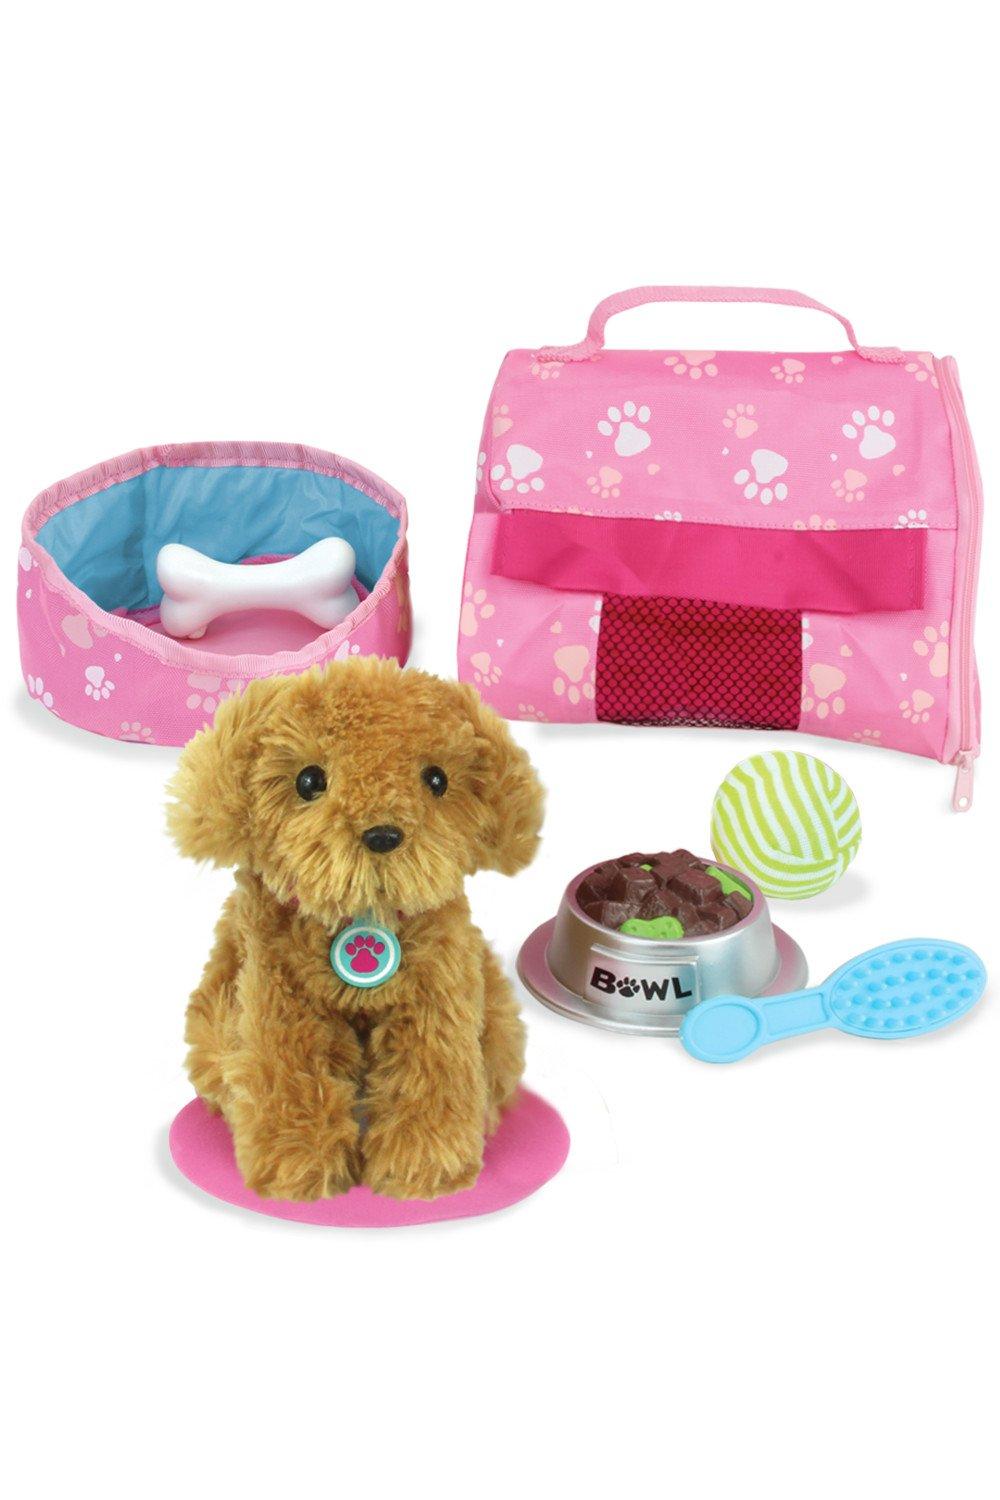 Sophia’s -  Plush Dog with Carrier & 8 Accessories